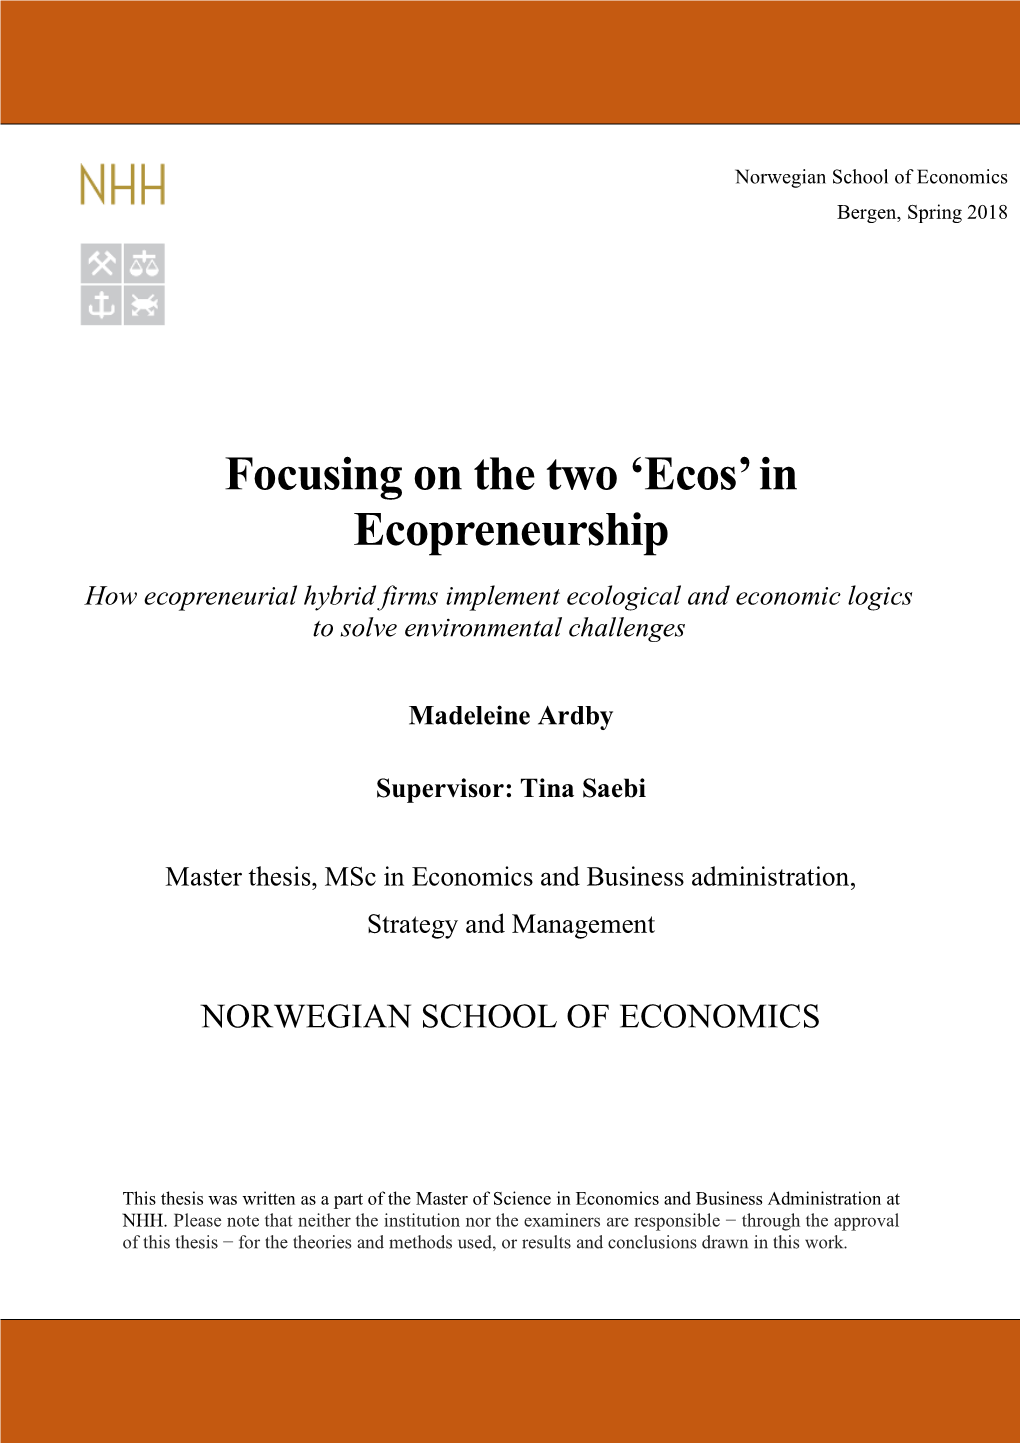 Focusing on the Two 'Ecos' in Ecopreneurship